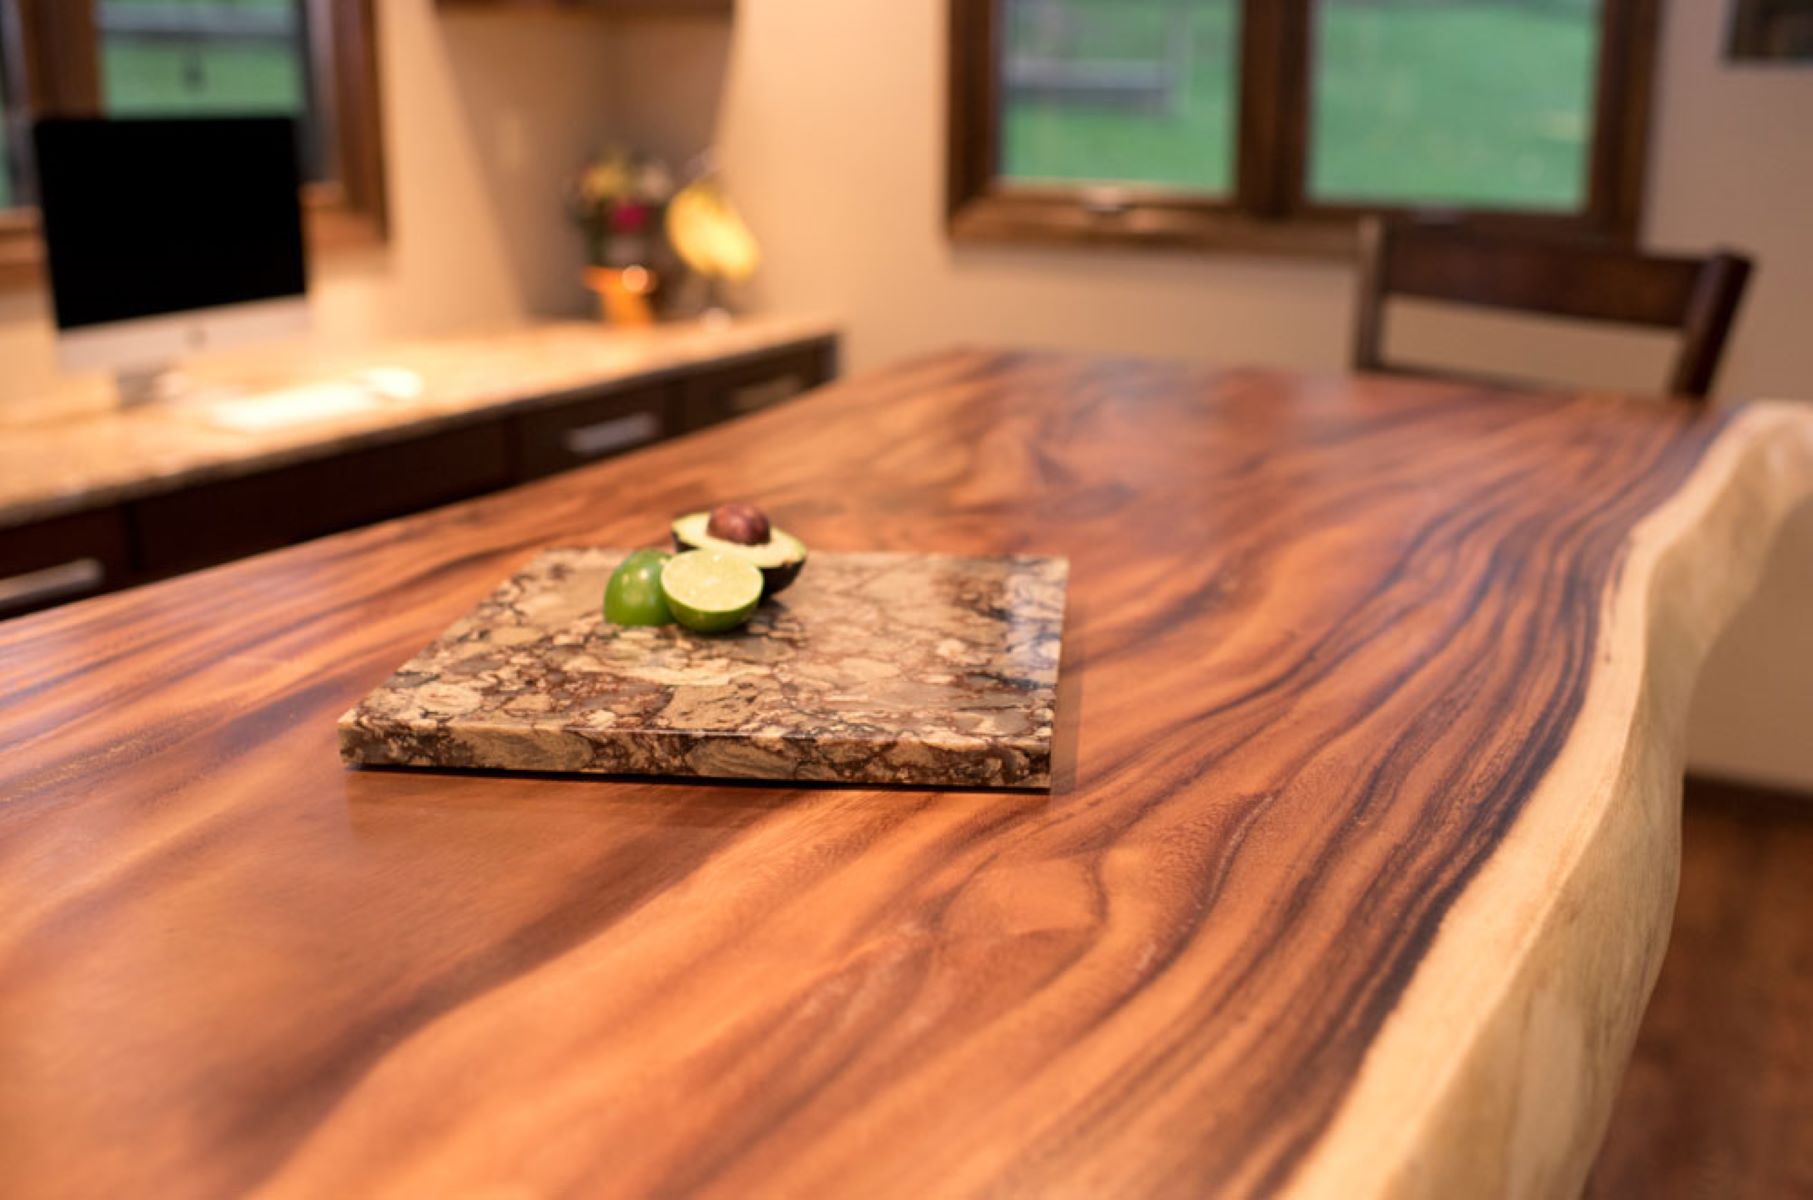 How To Make Wood Kitchen Countertops